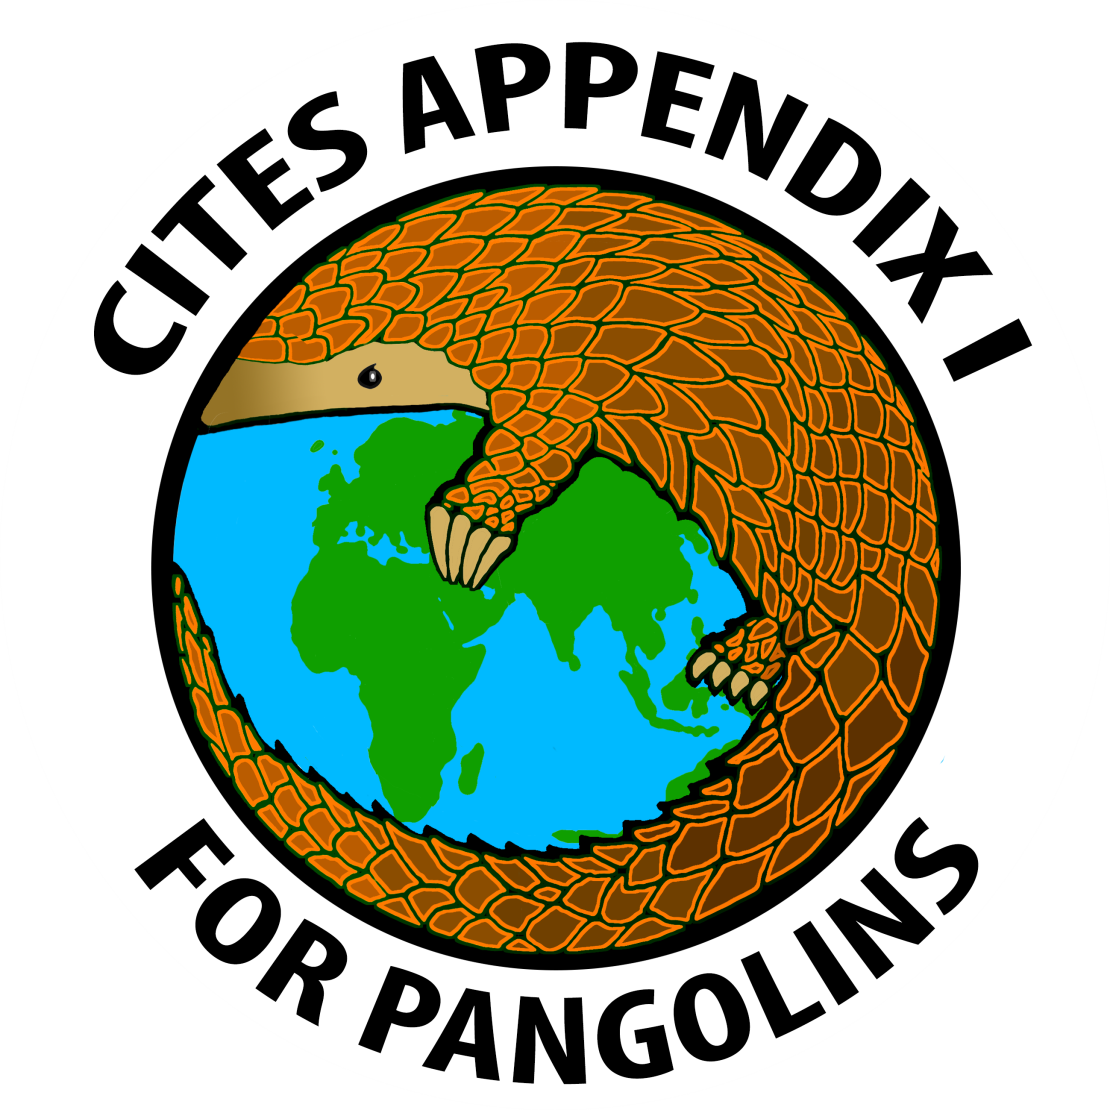 And Post It To Facebook Or Twitter, Tagging @cites - Cites Pangolin (1110x1110)